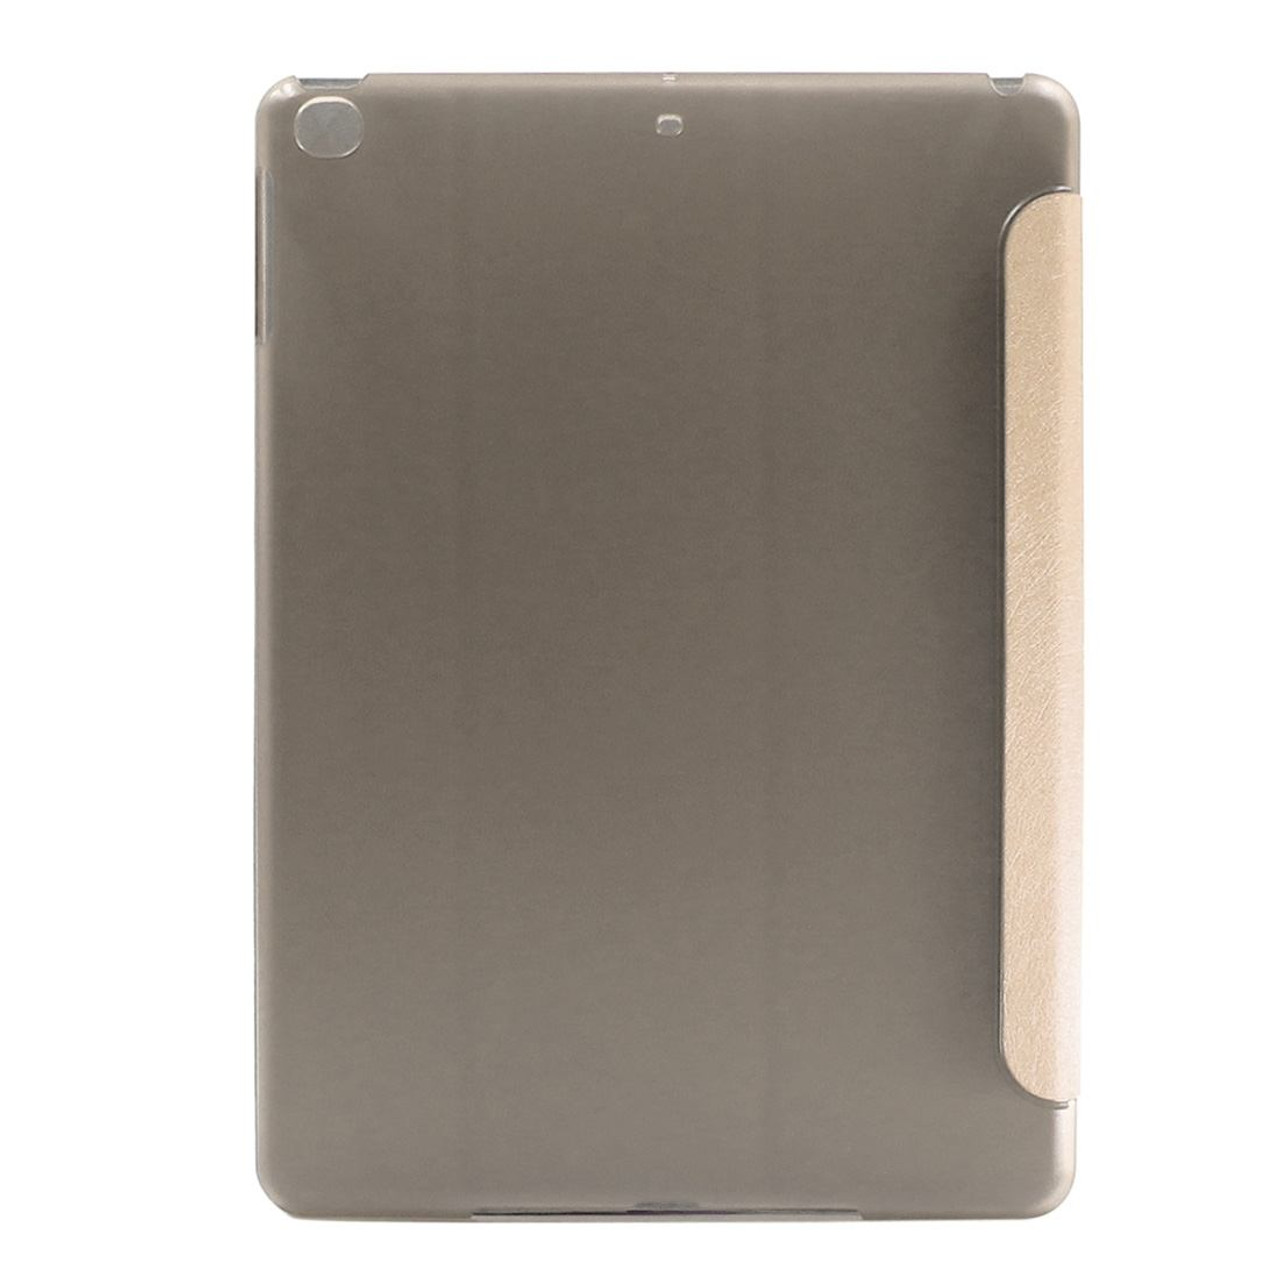 Gold Silk Textured Smart Leather iPad 2017 9.7-inch Case | Leather iPad ...